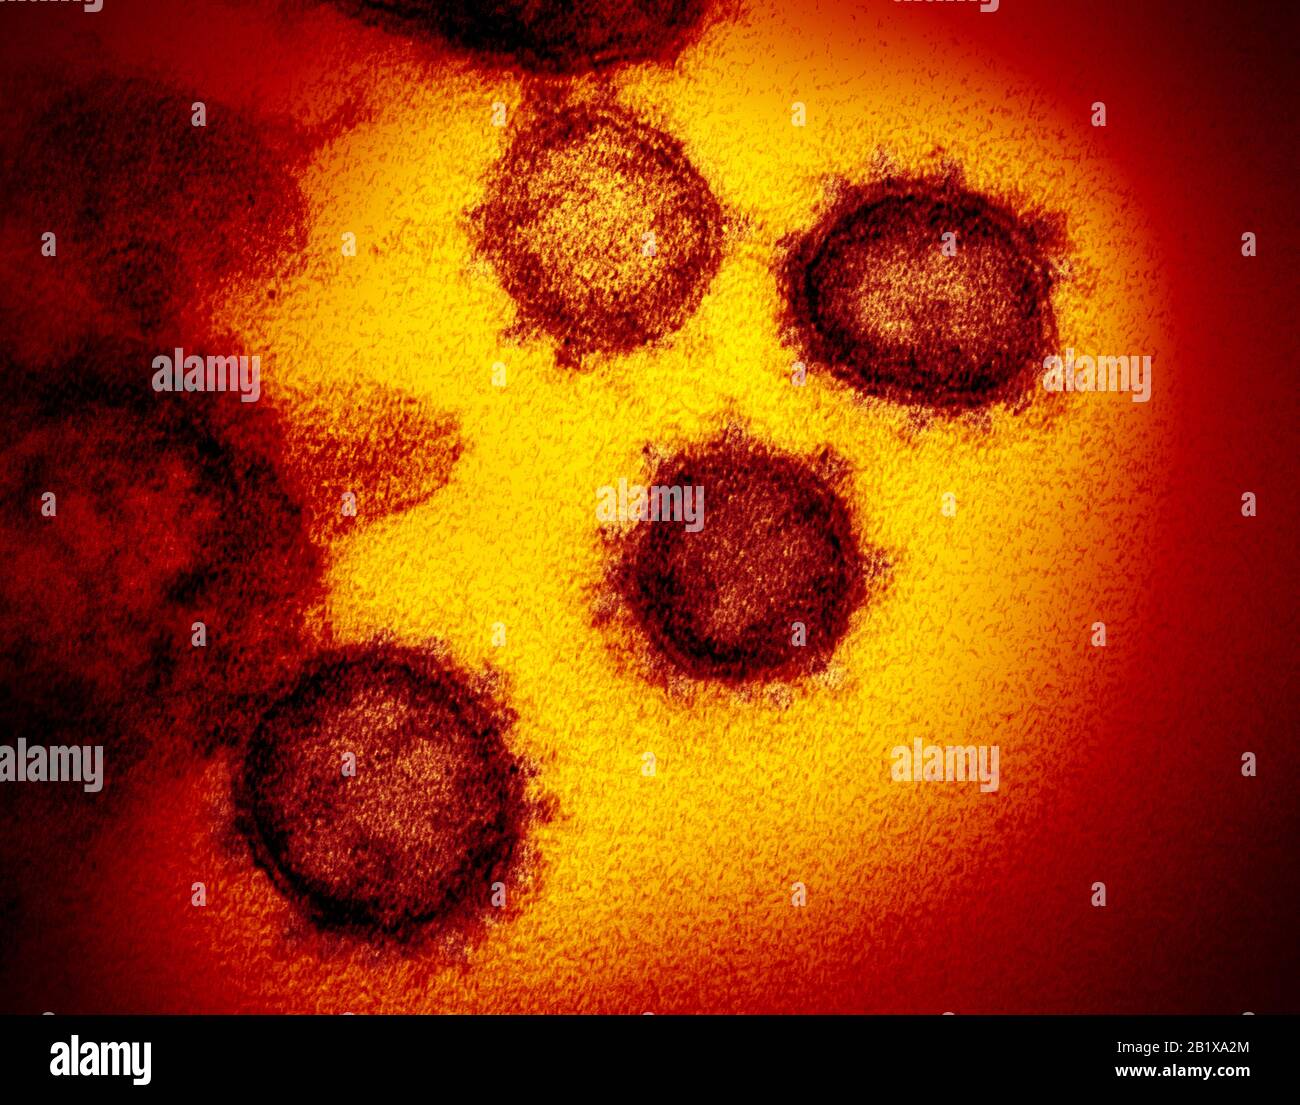 COVID-19. Novel Coronavirus SARS-CoV-2.This transmission electron microscope image shows SARS-CoV-2—also known as 2019-nCoV, the virus that causes COVID-19. isolated from a patient in the U.S., emerging from the surface of cells cultured in the lab. Credit: NIAID-RML Stock Photo